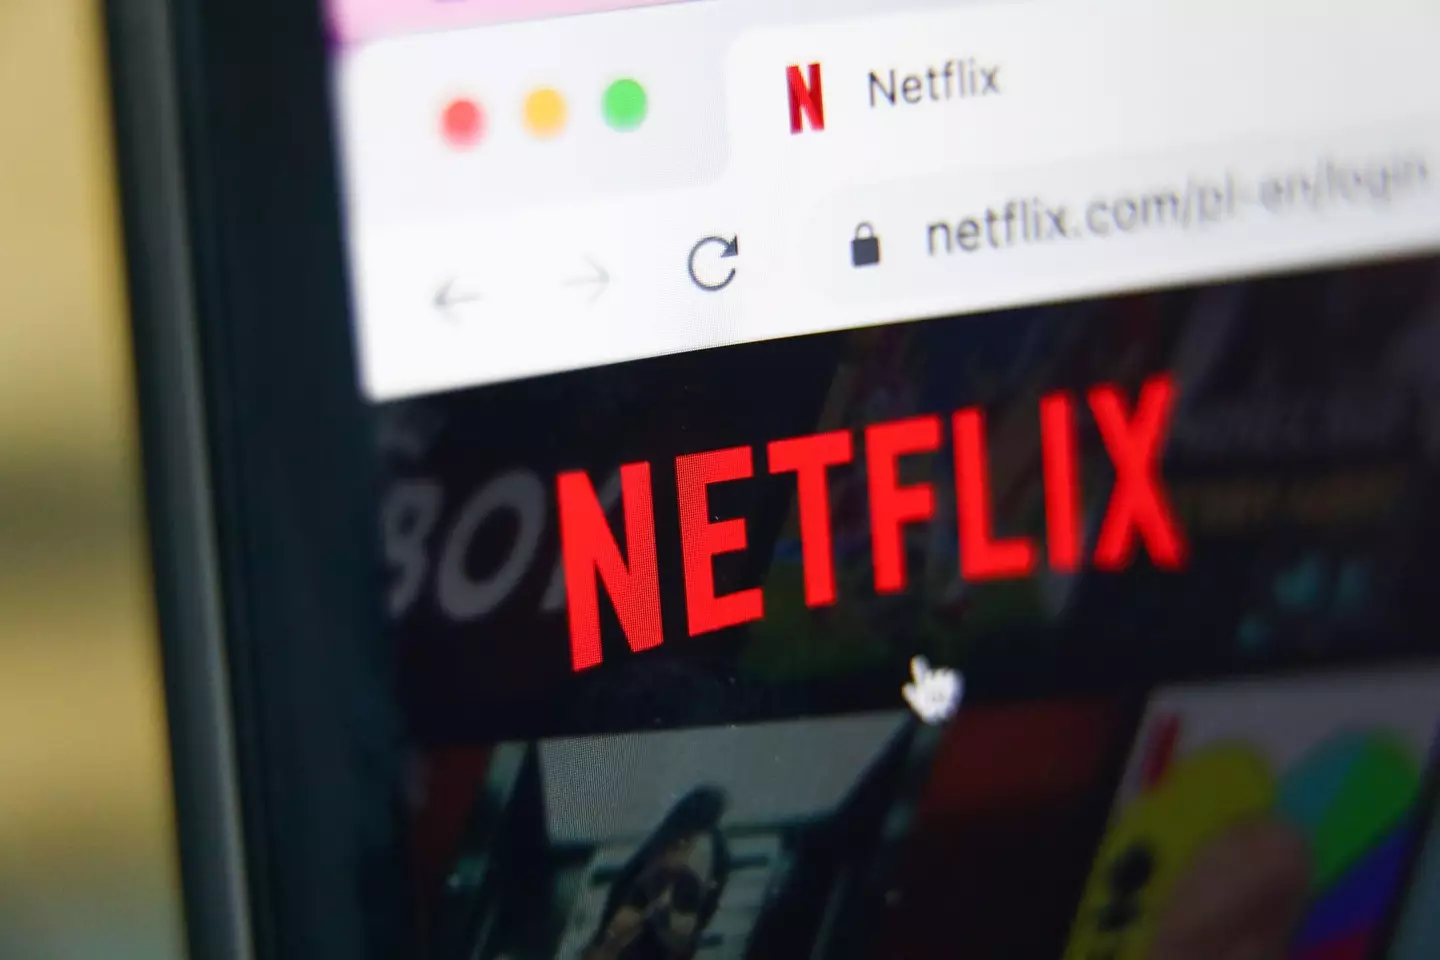 Netflix wants to crack down on password sharing, and that includes the people you don't know are using your account.